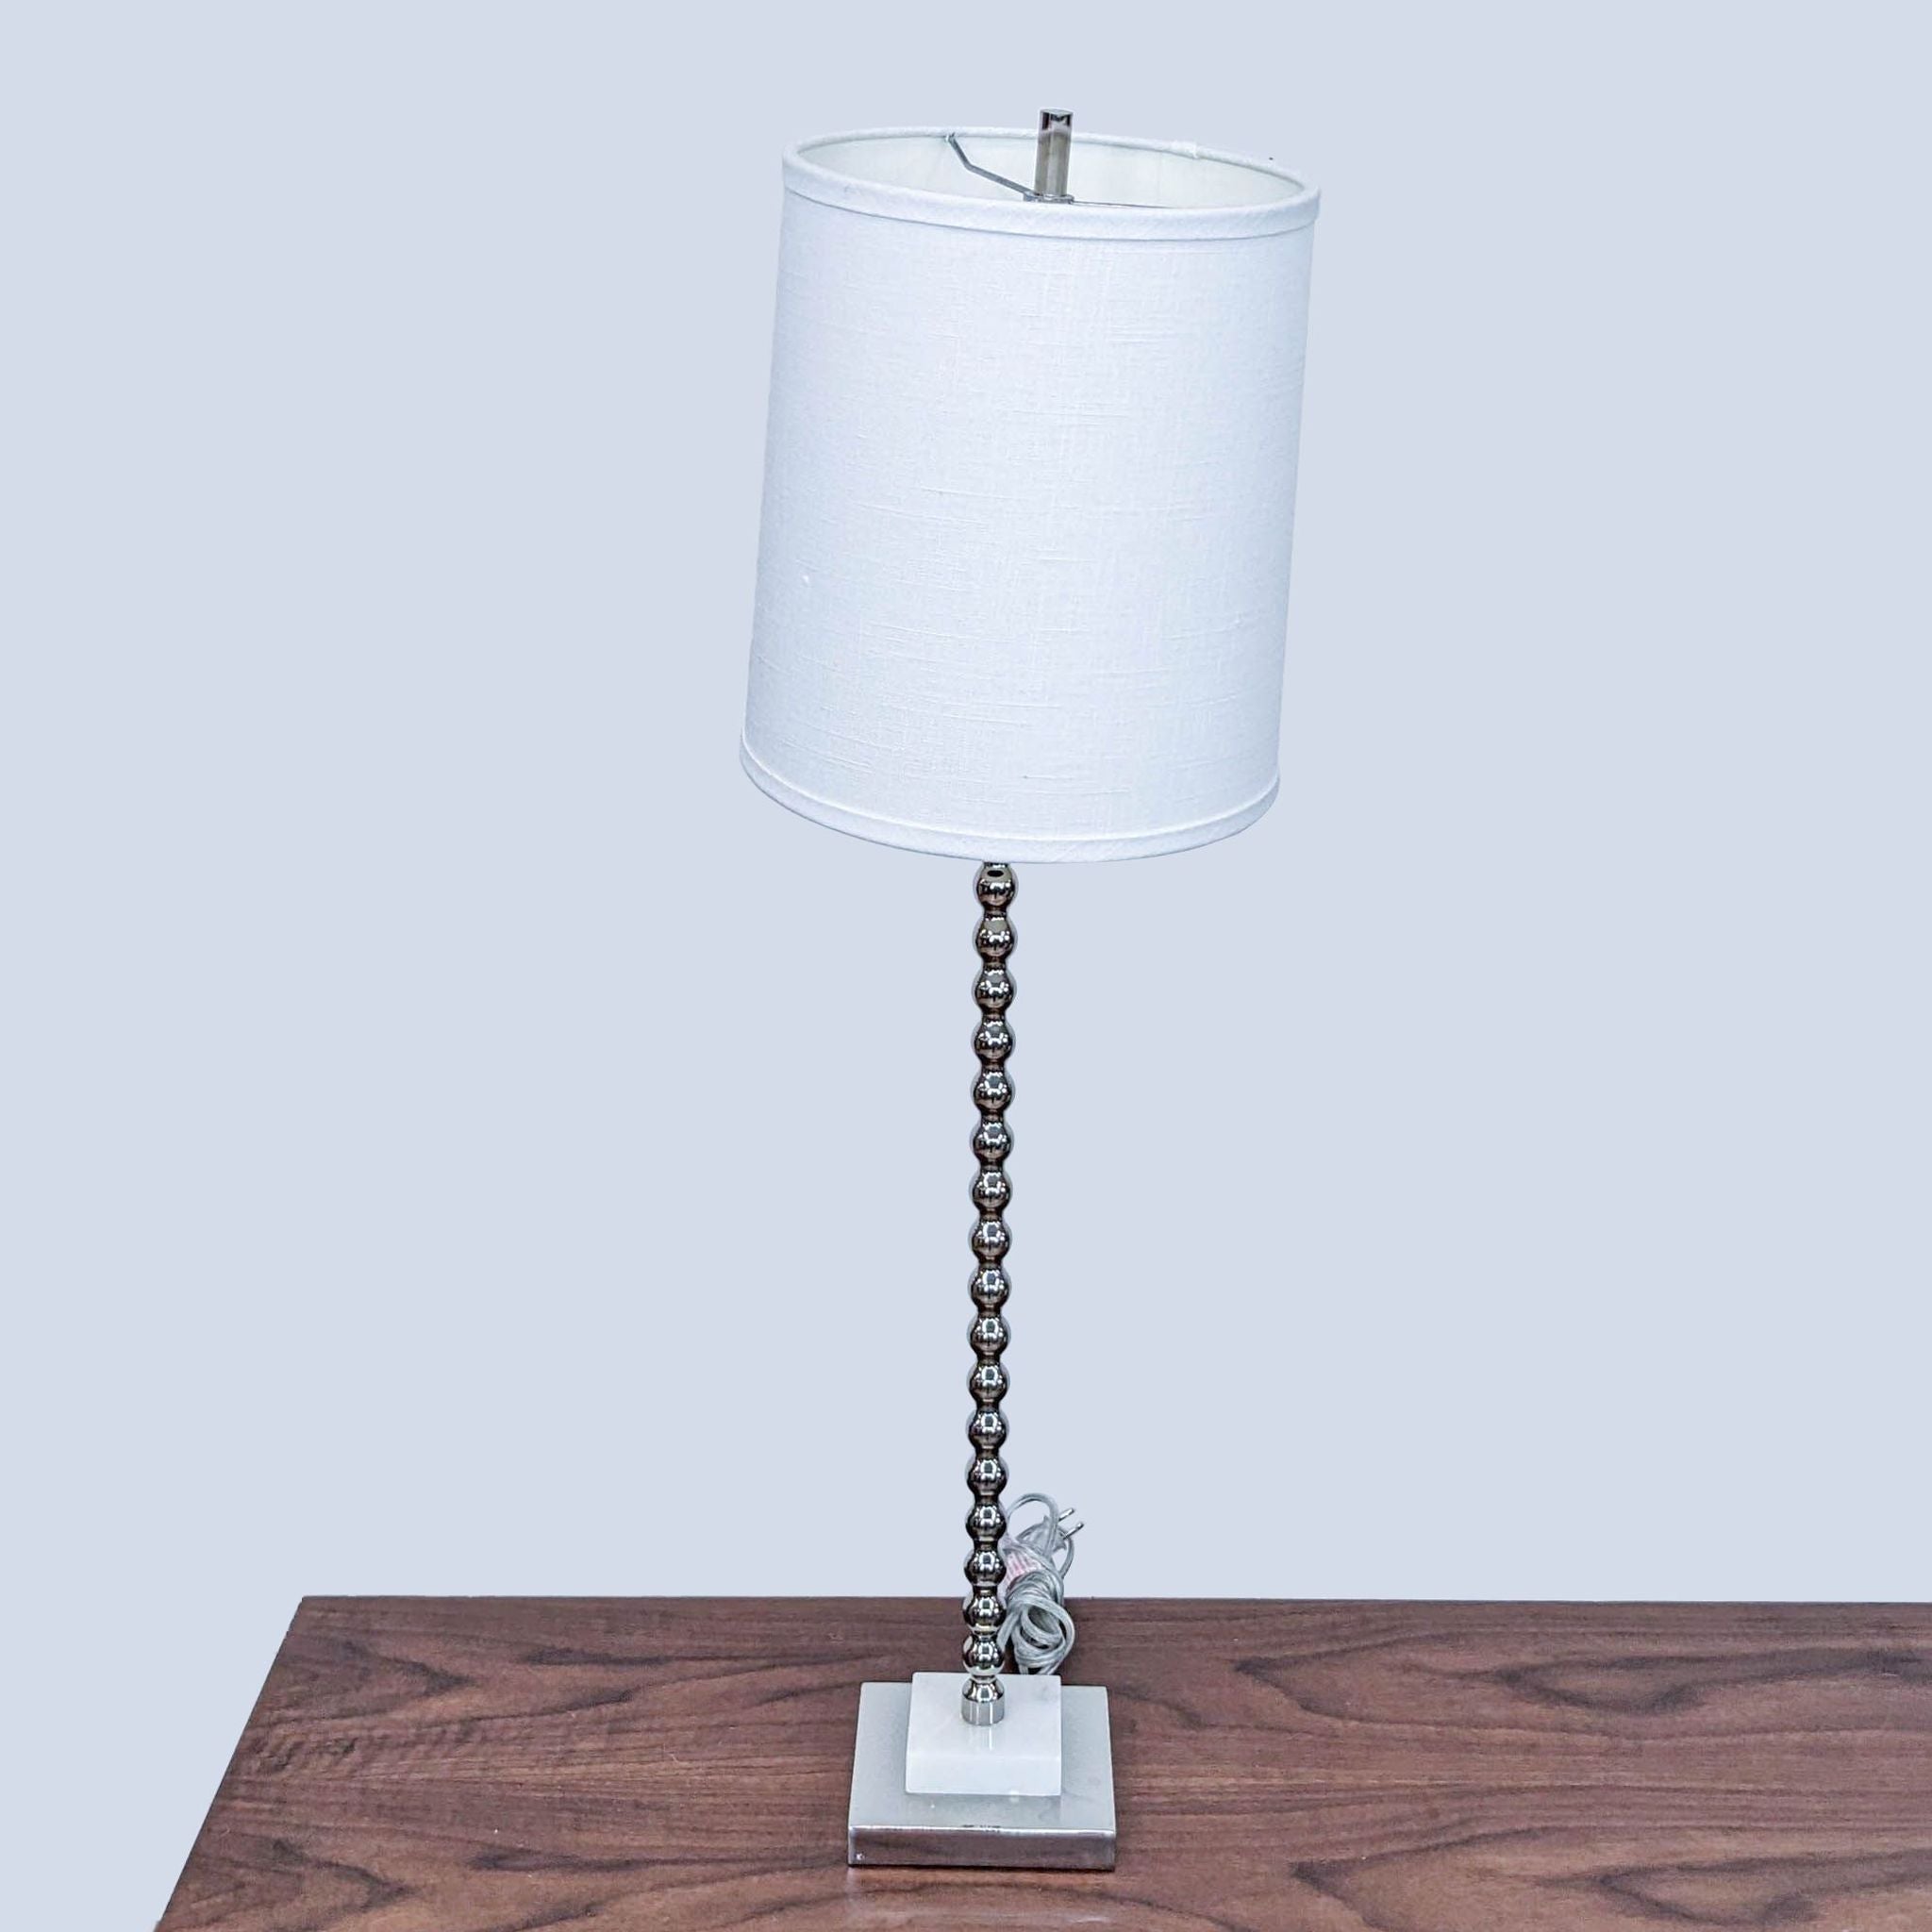 Elegant Reperch lighting, featuring a white cylindrical lampshade and a decorative metal base on a table.